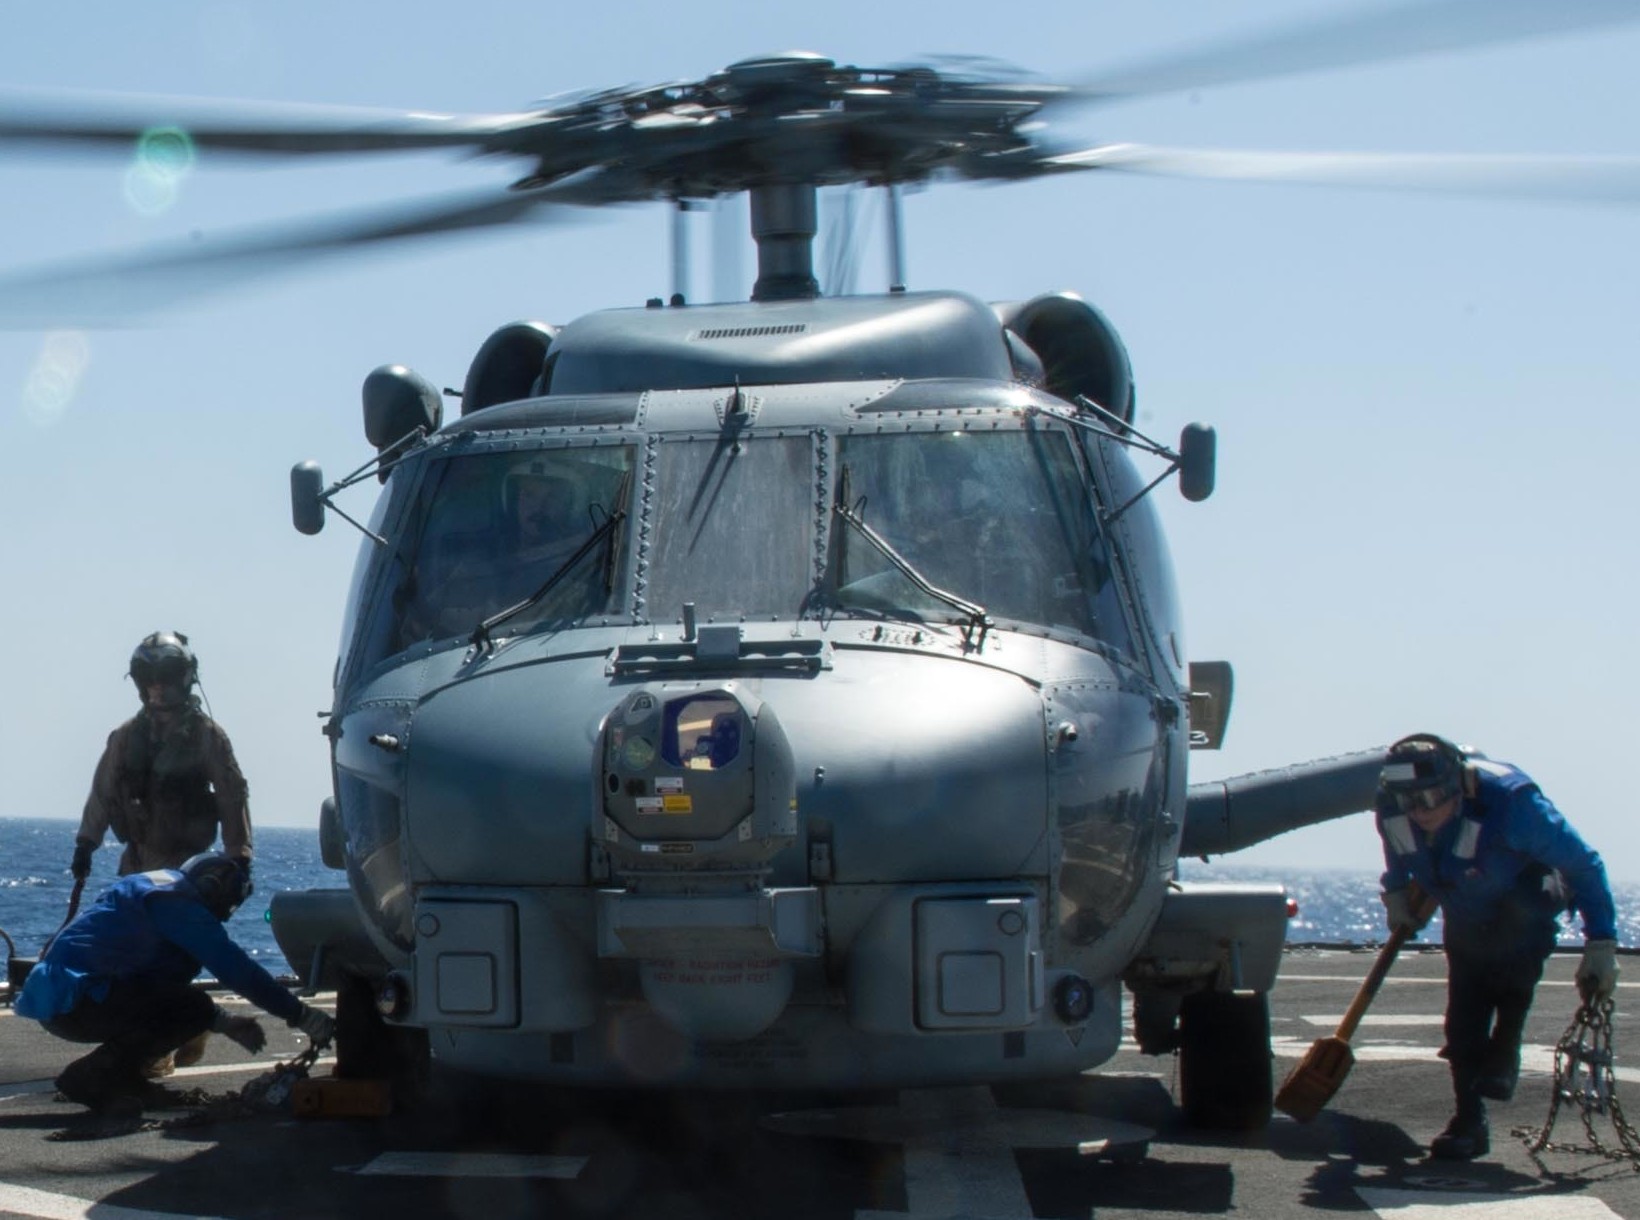 hsm-70 spartans helicopter maritime strike squadron mh-60r seahawk 2014 96 uss mitscher ddg-57